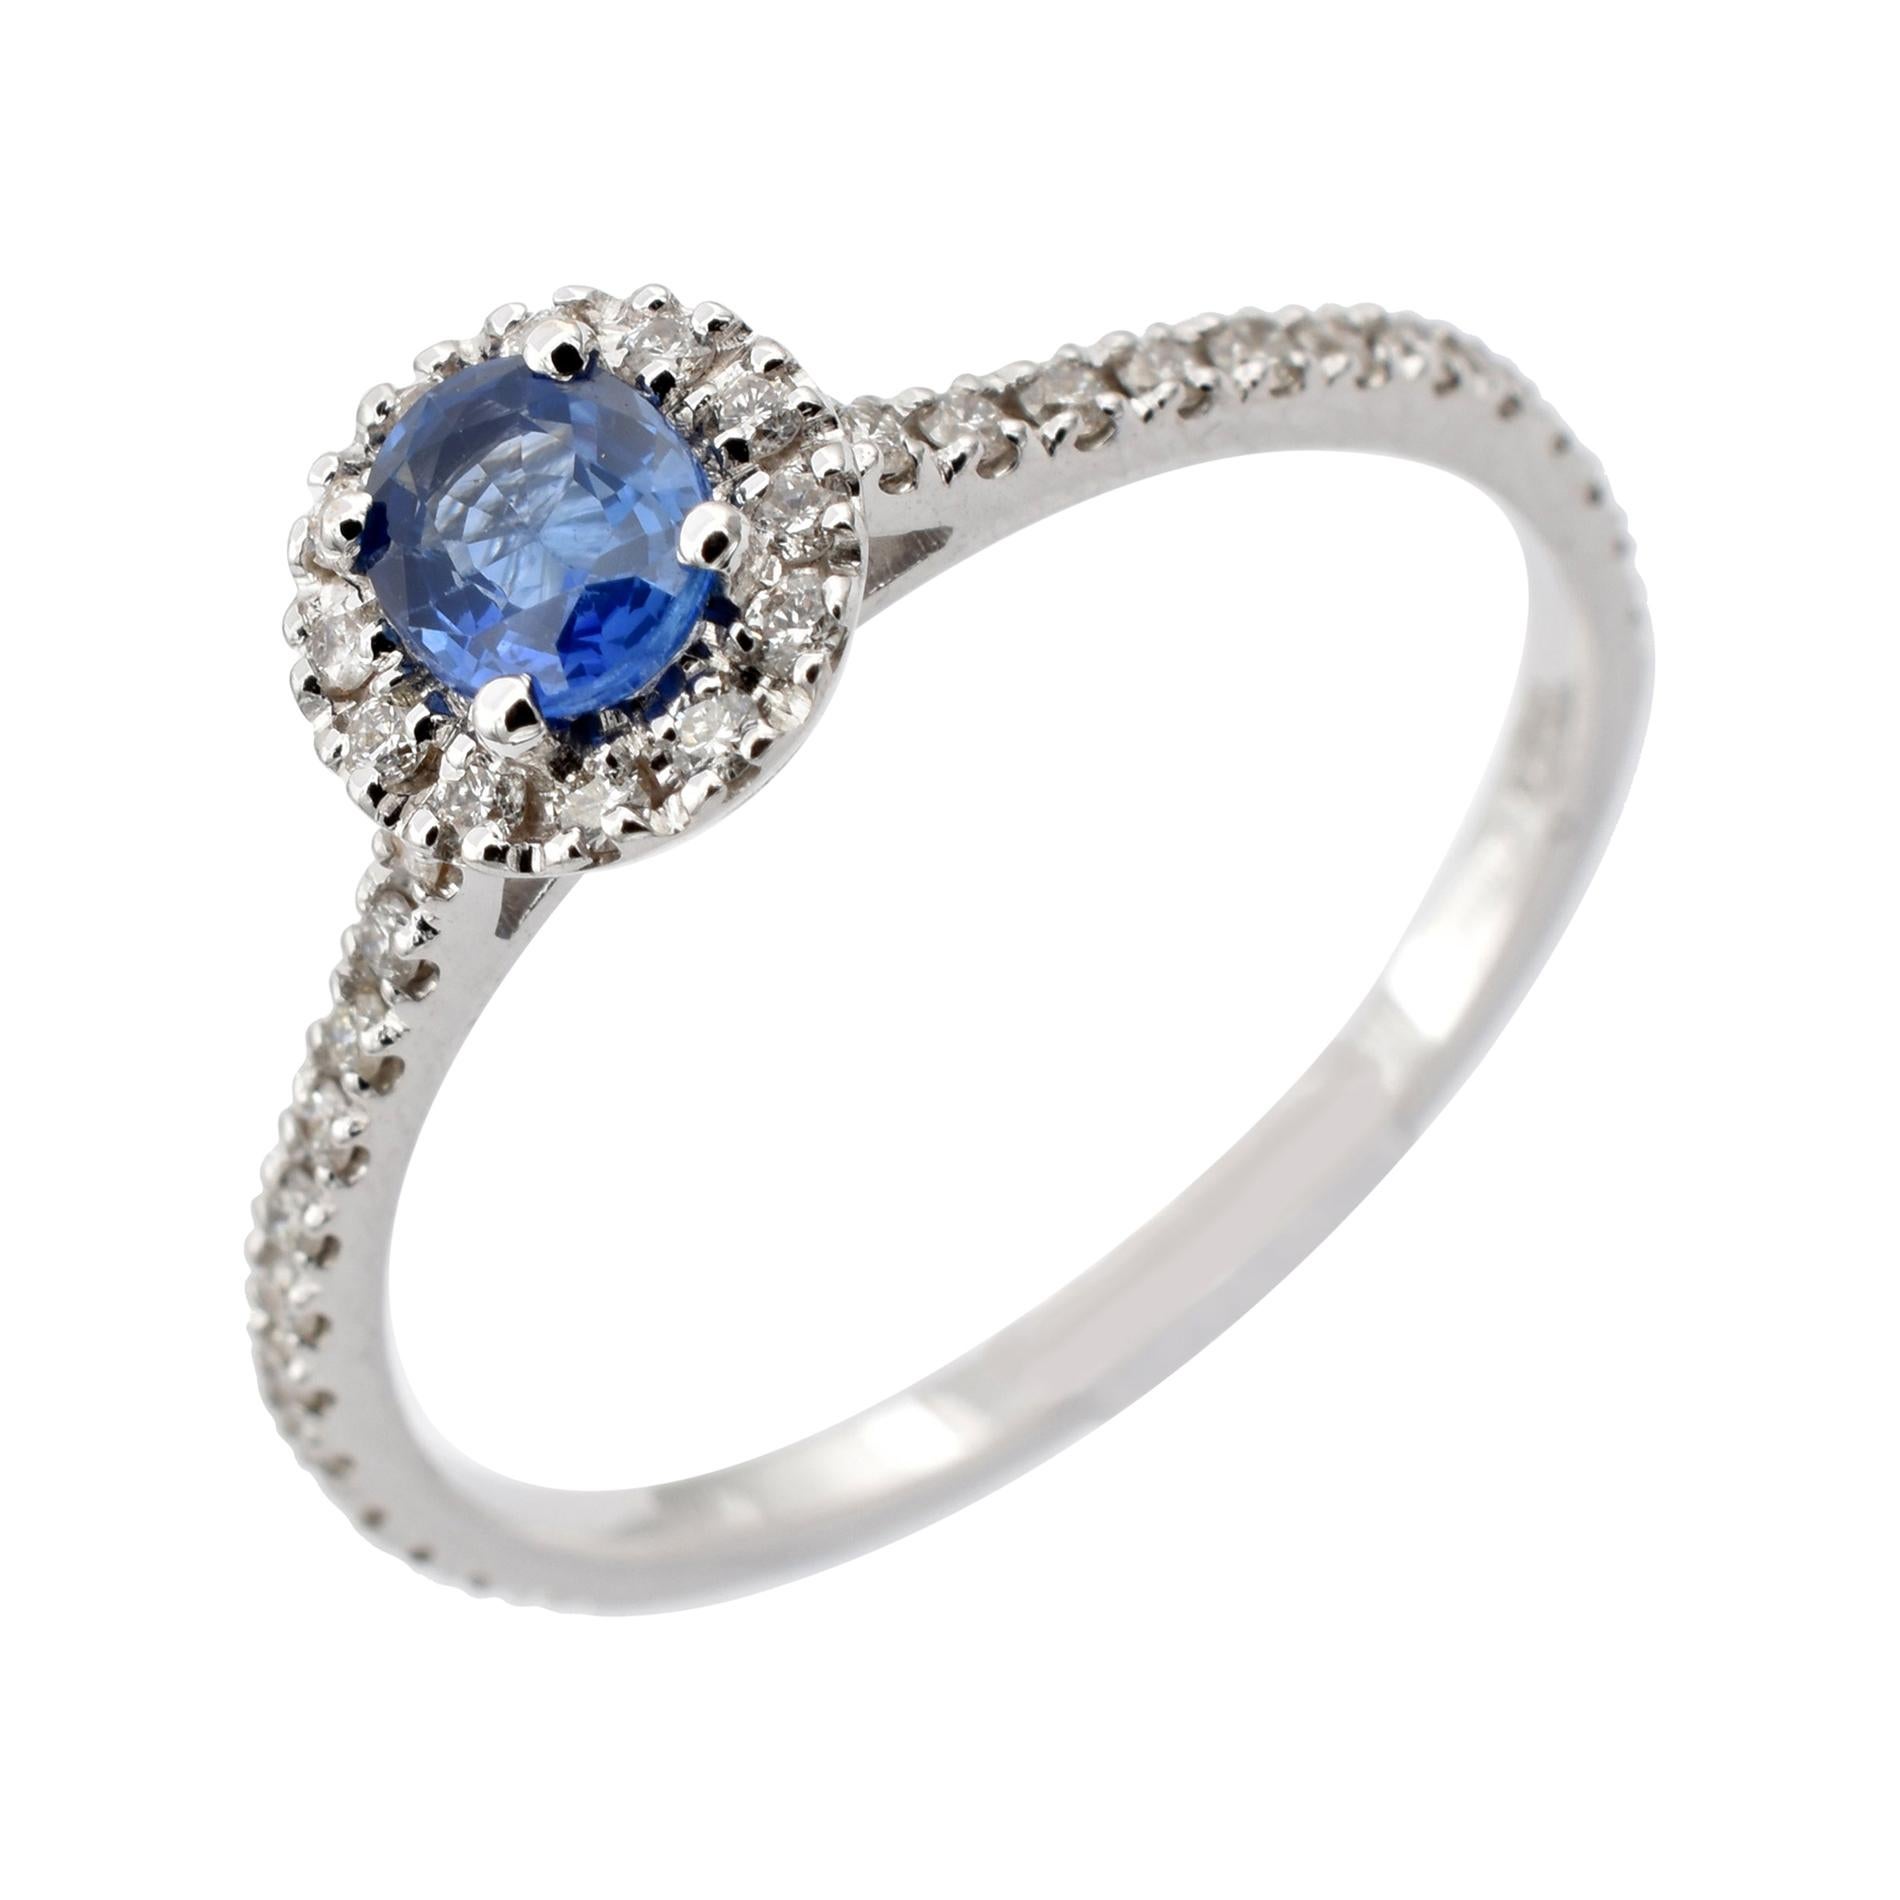 Gilberto Cassola Oval Sapphire and Diamonds White Gold Ring Made in Italy